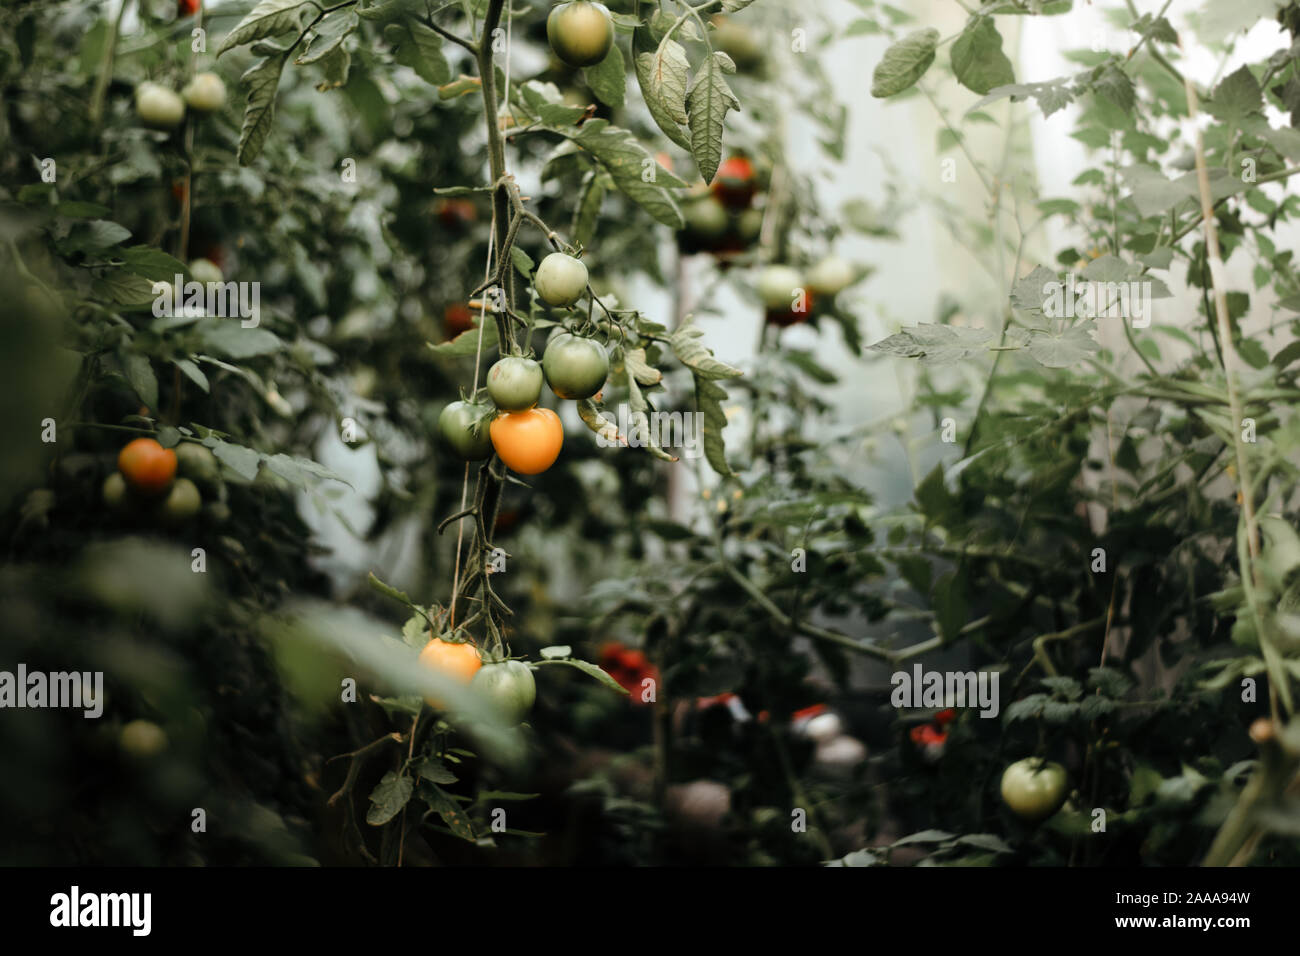 Tomato plants growing in a glass greenhouse, biological and organic agriculture, traditional farming methods Stock Photo